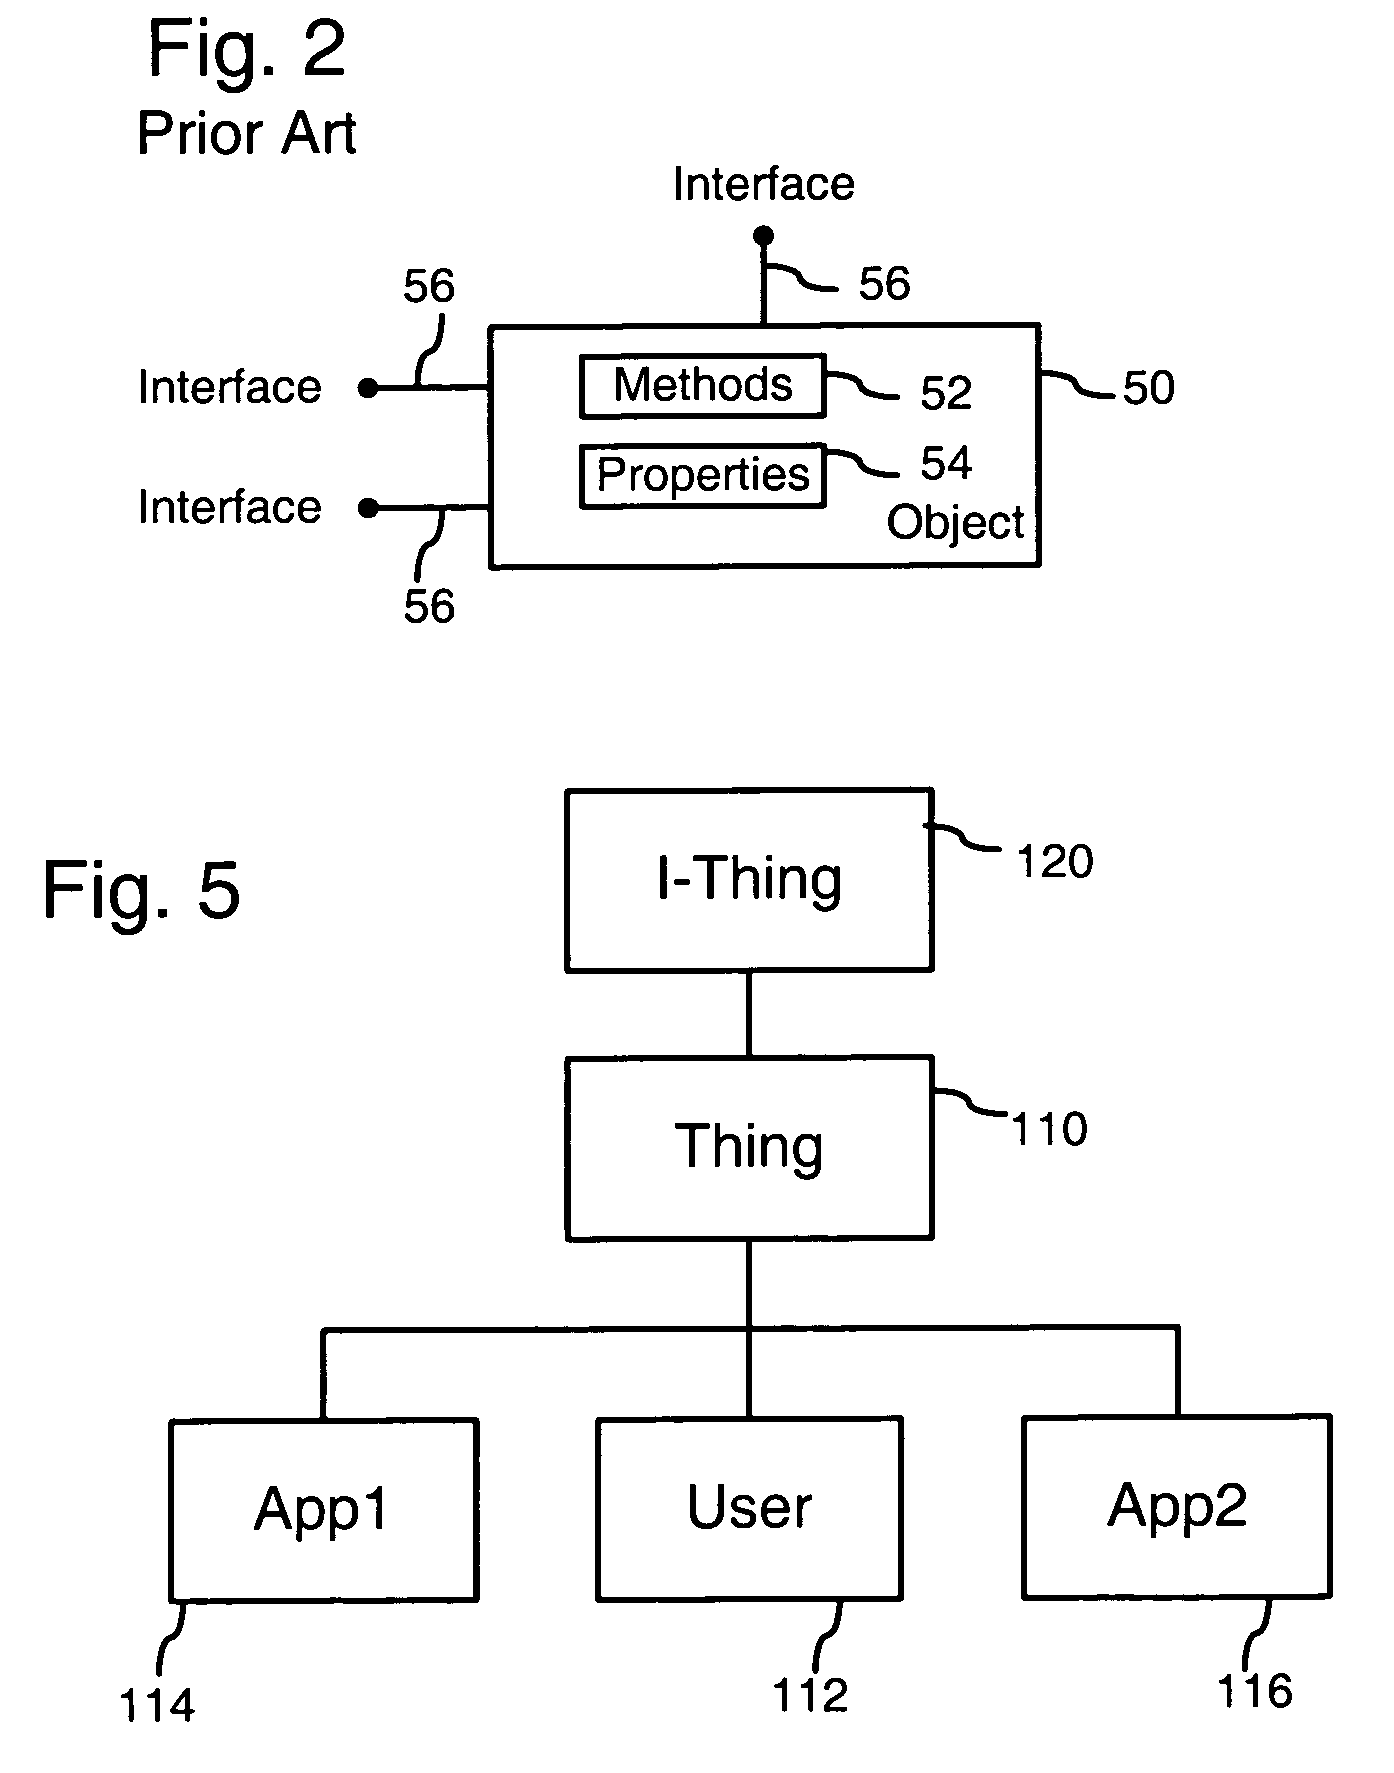 Shared and private object stores for a networked computer application communication environment